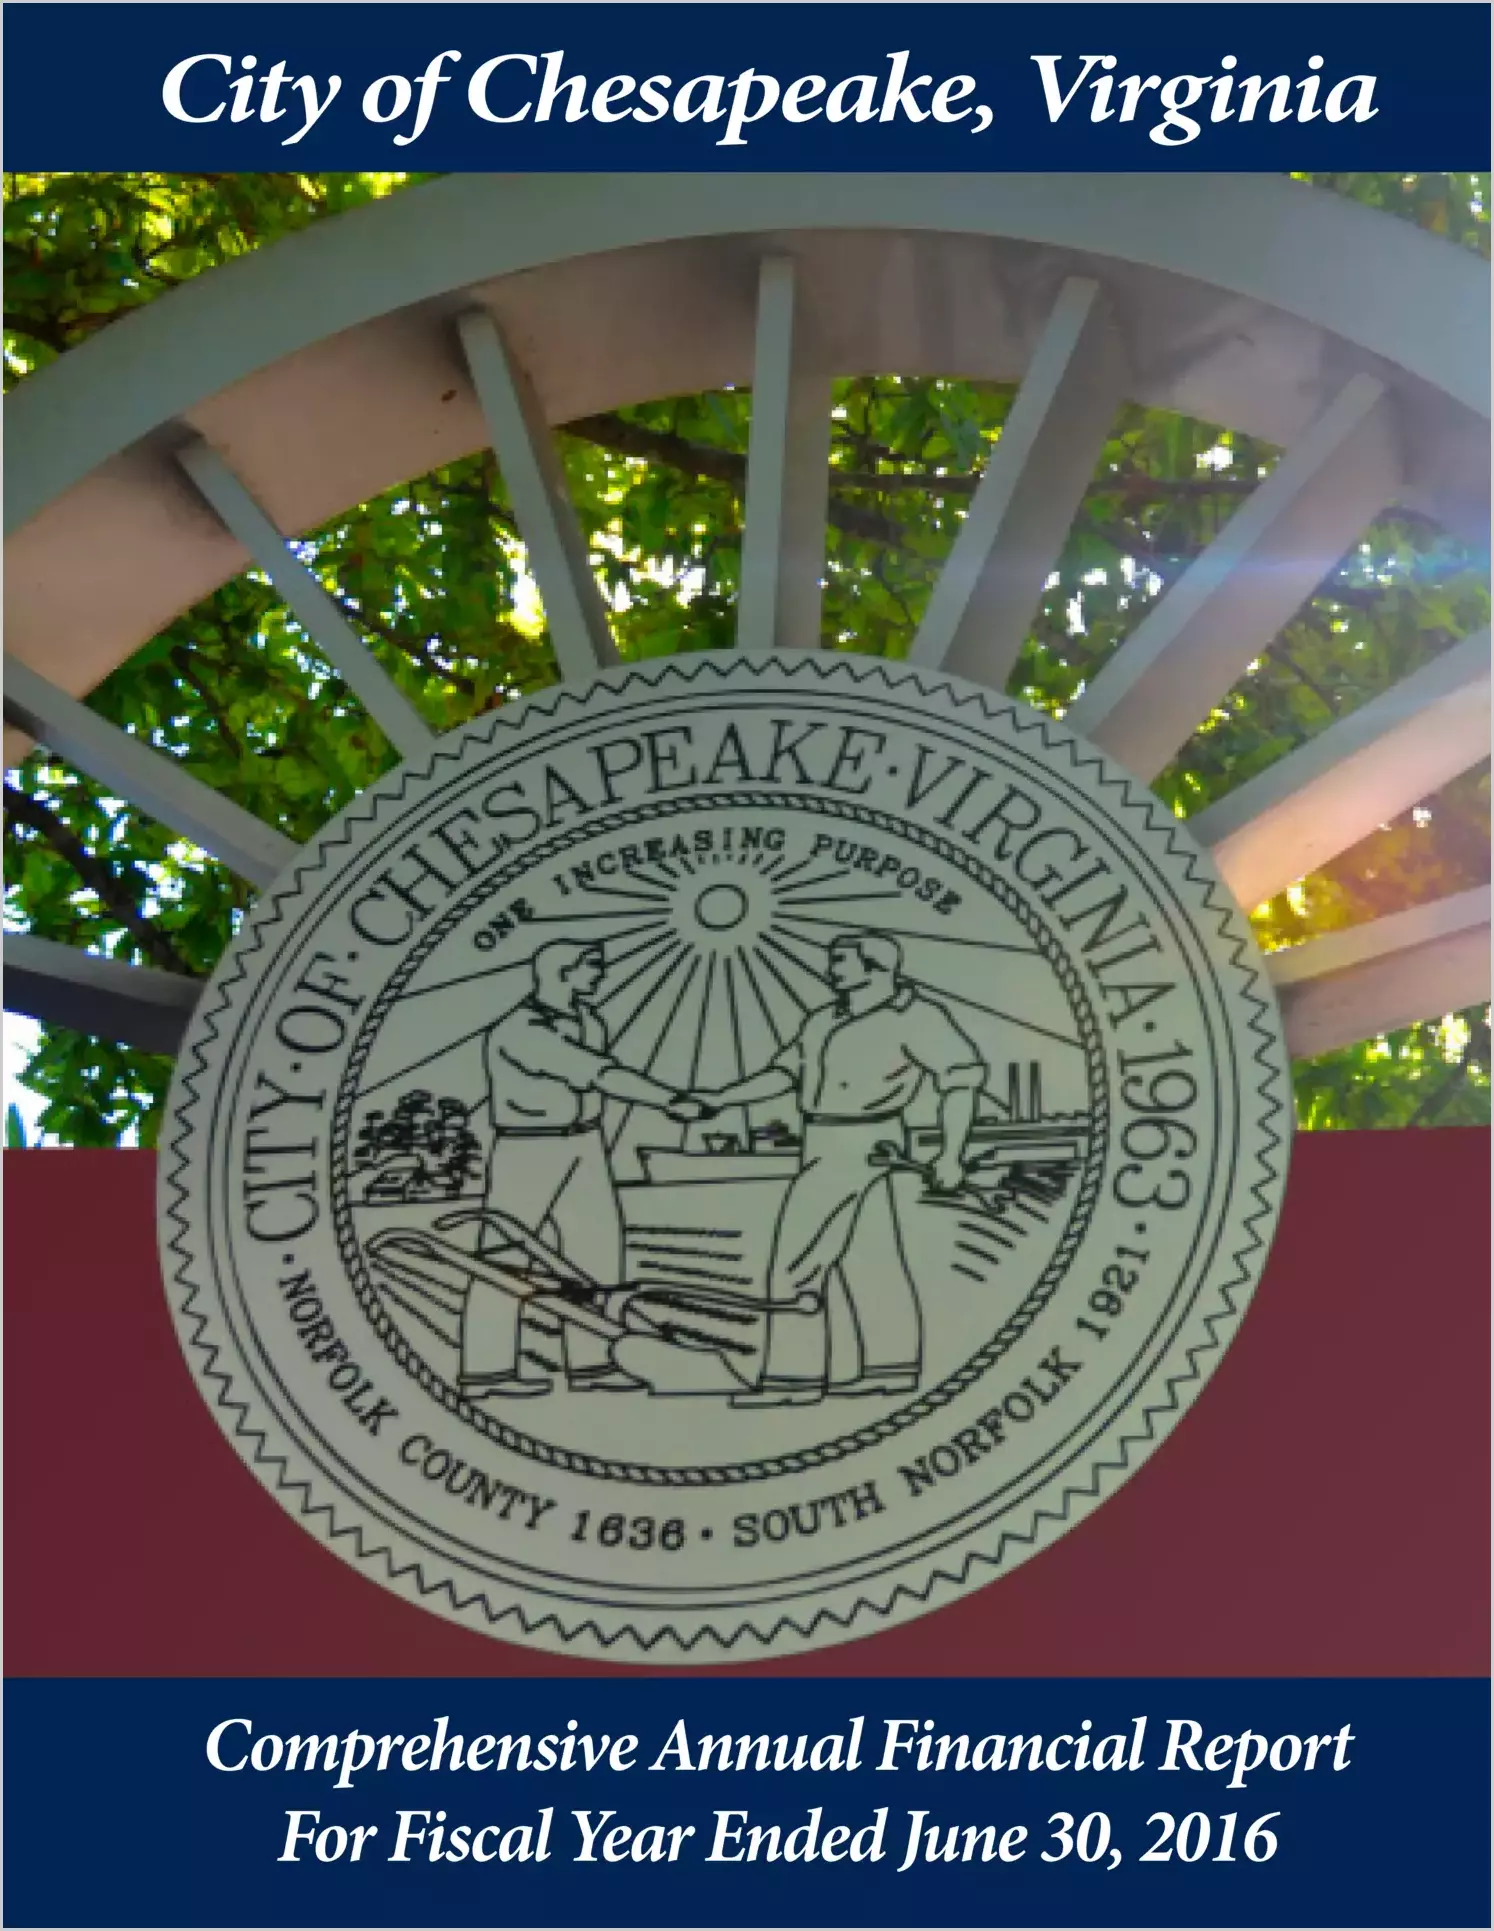 2016 Annual Financial Report for City of Chesapeake